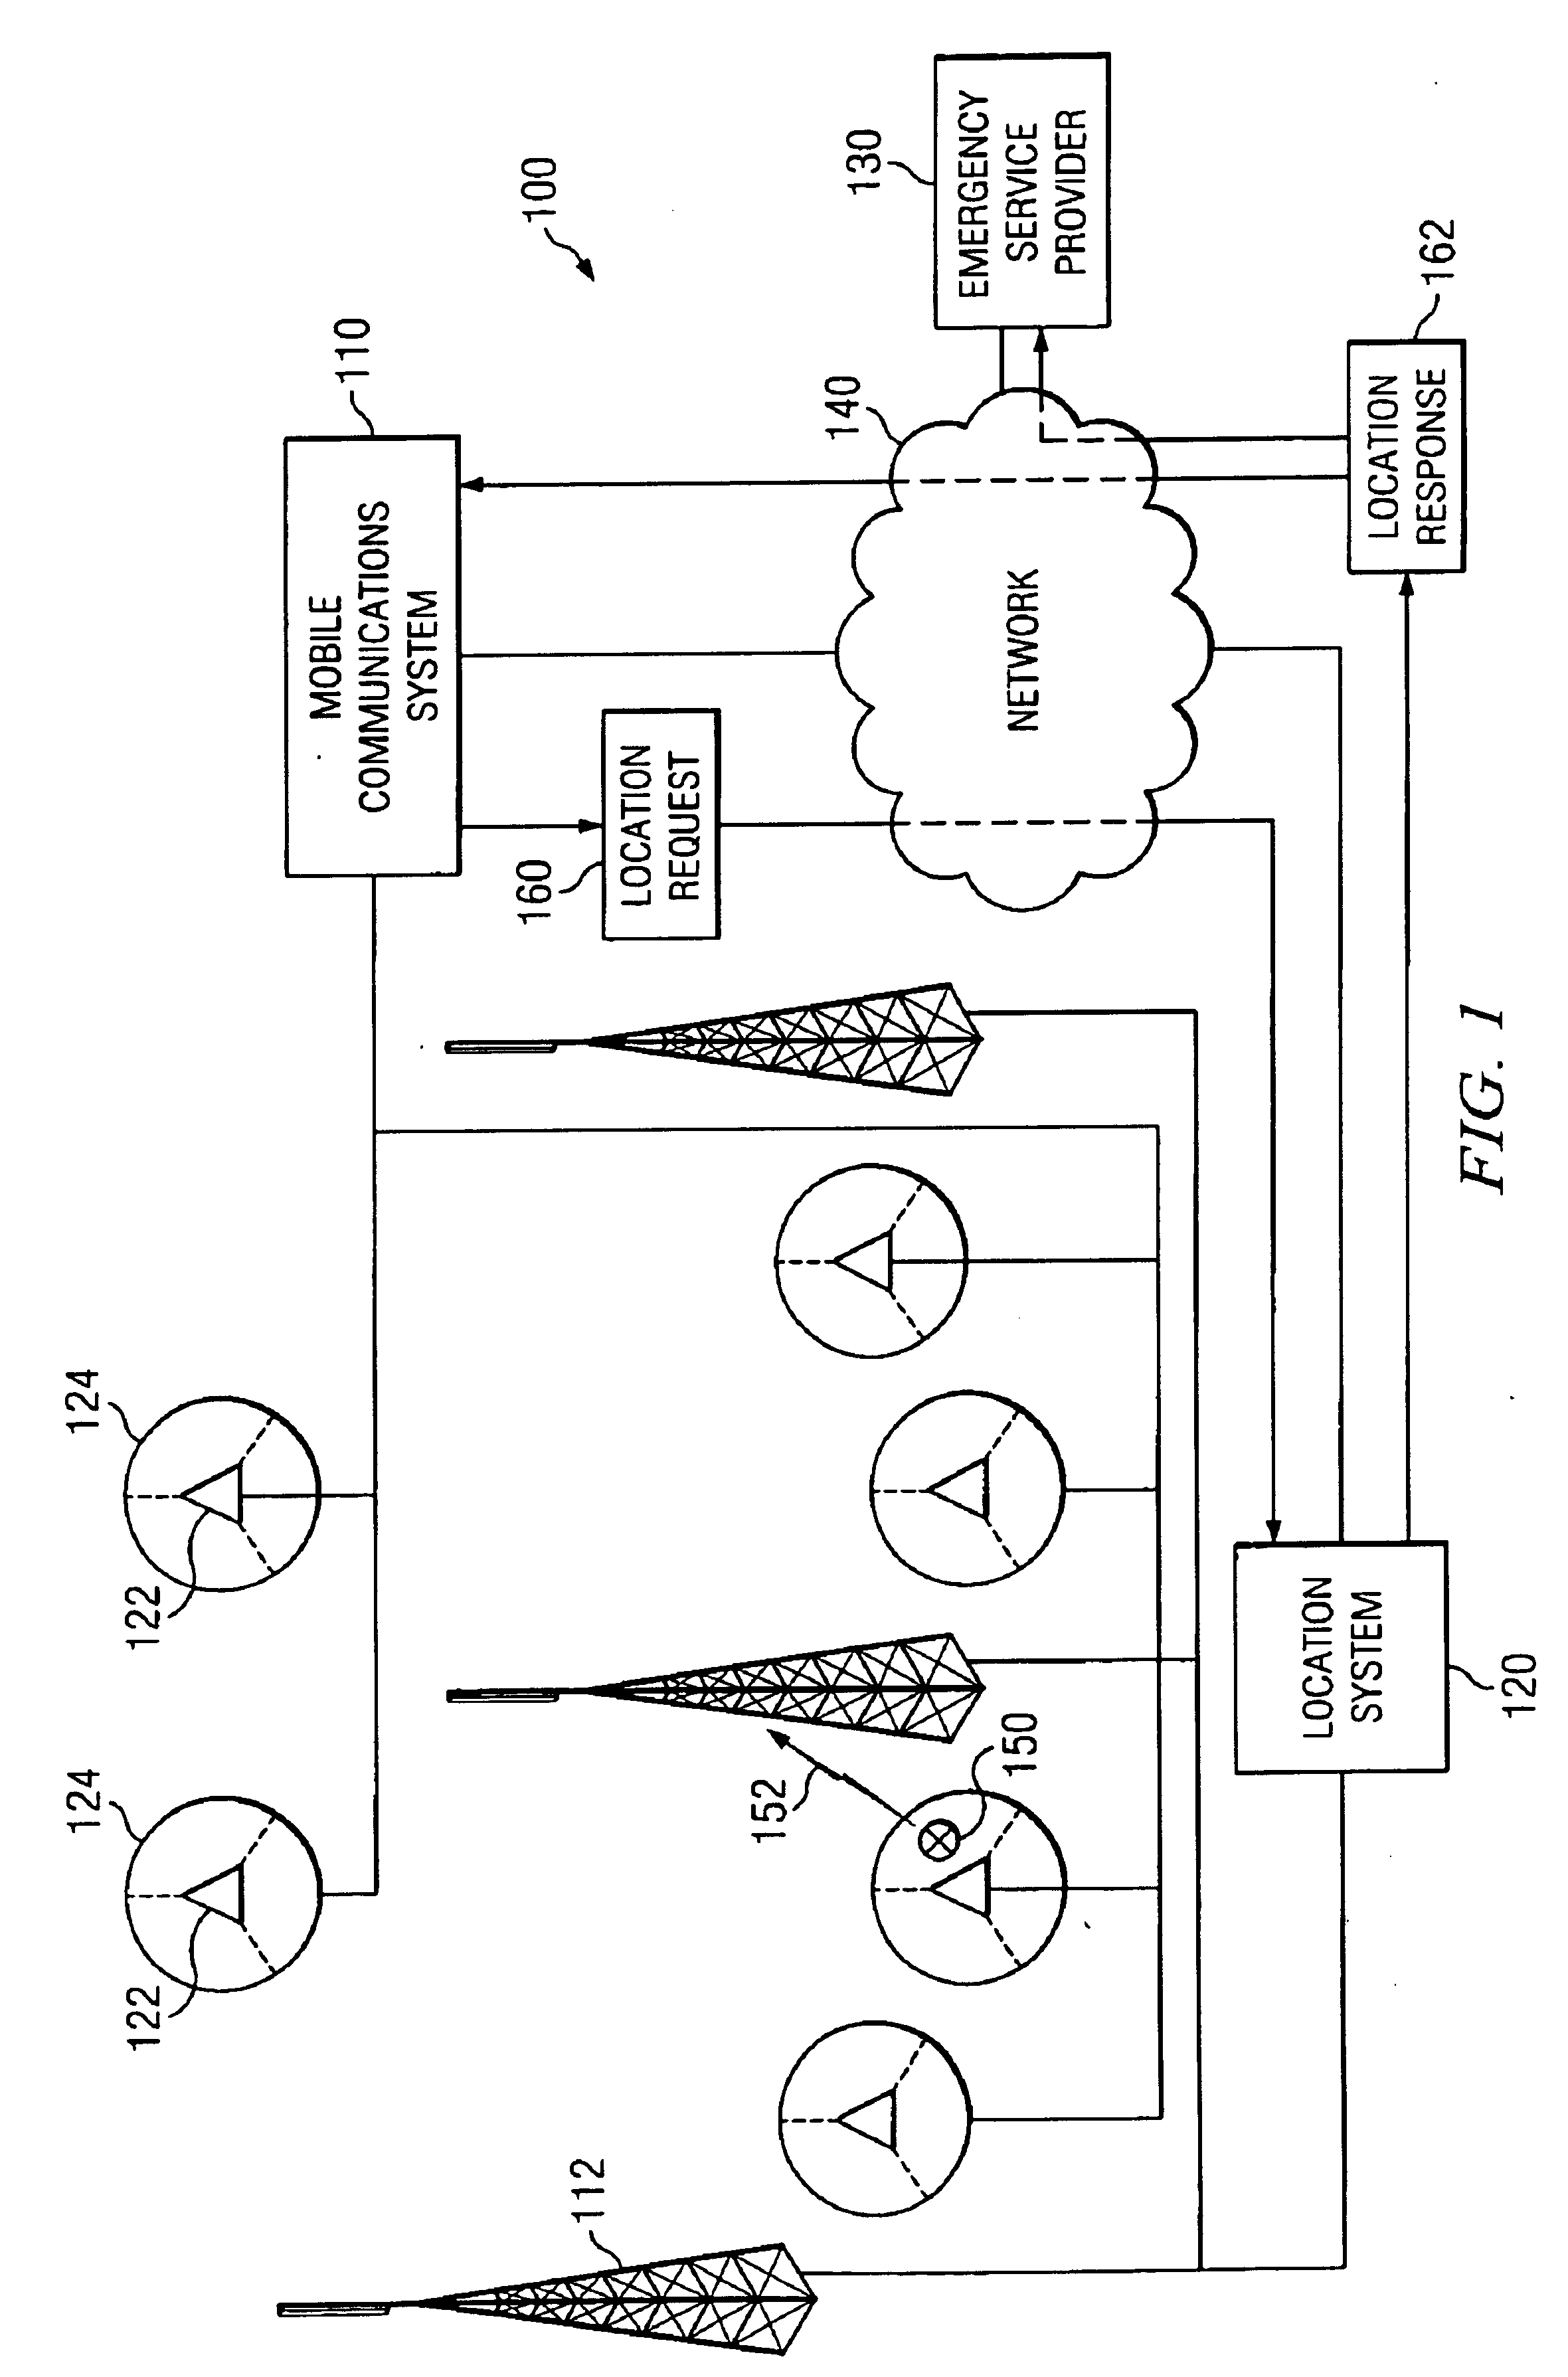 System and method for locating a mobile phone